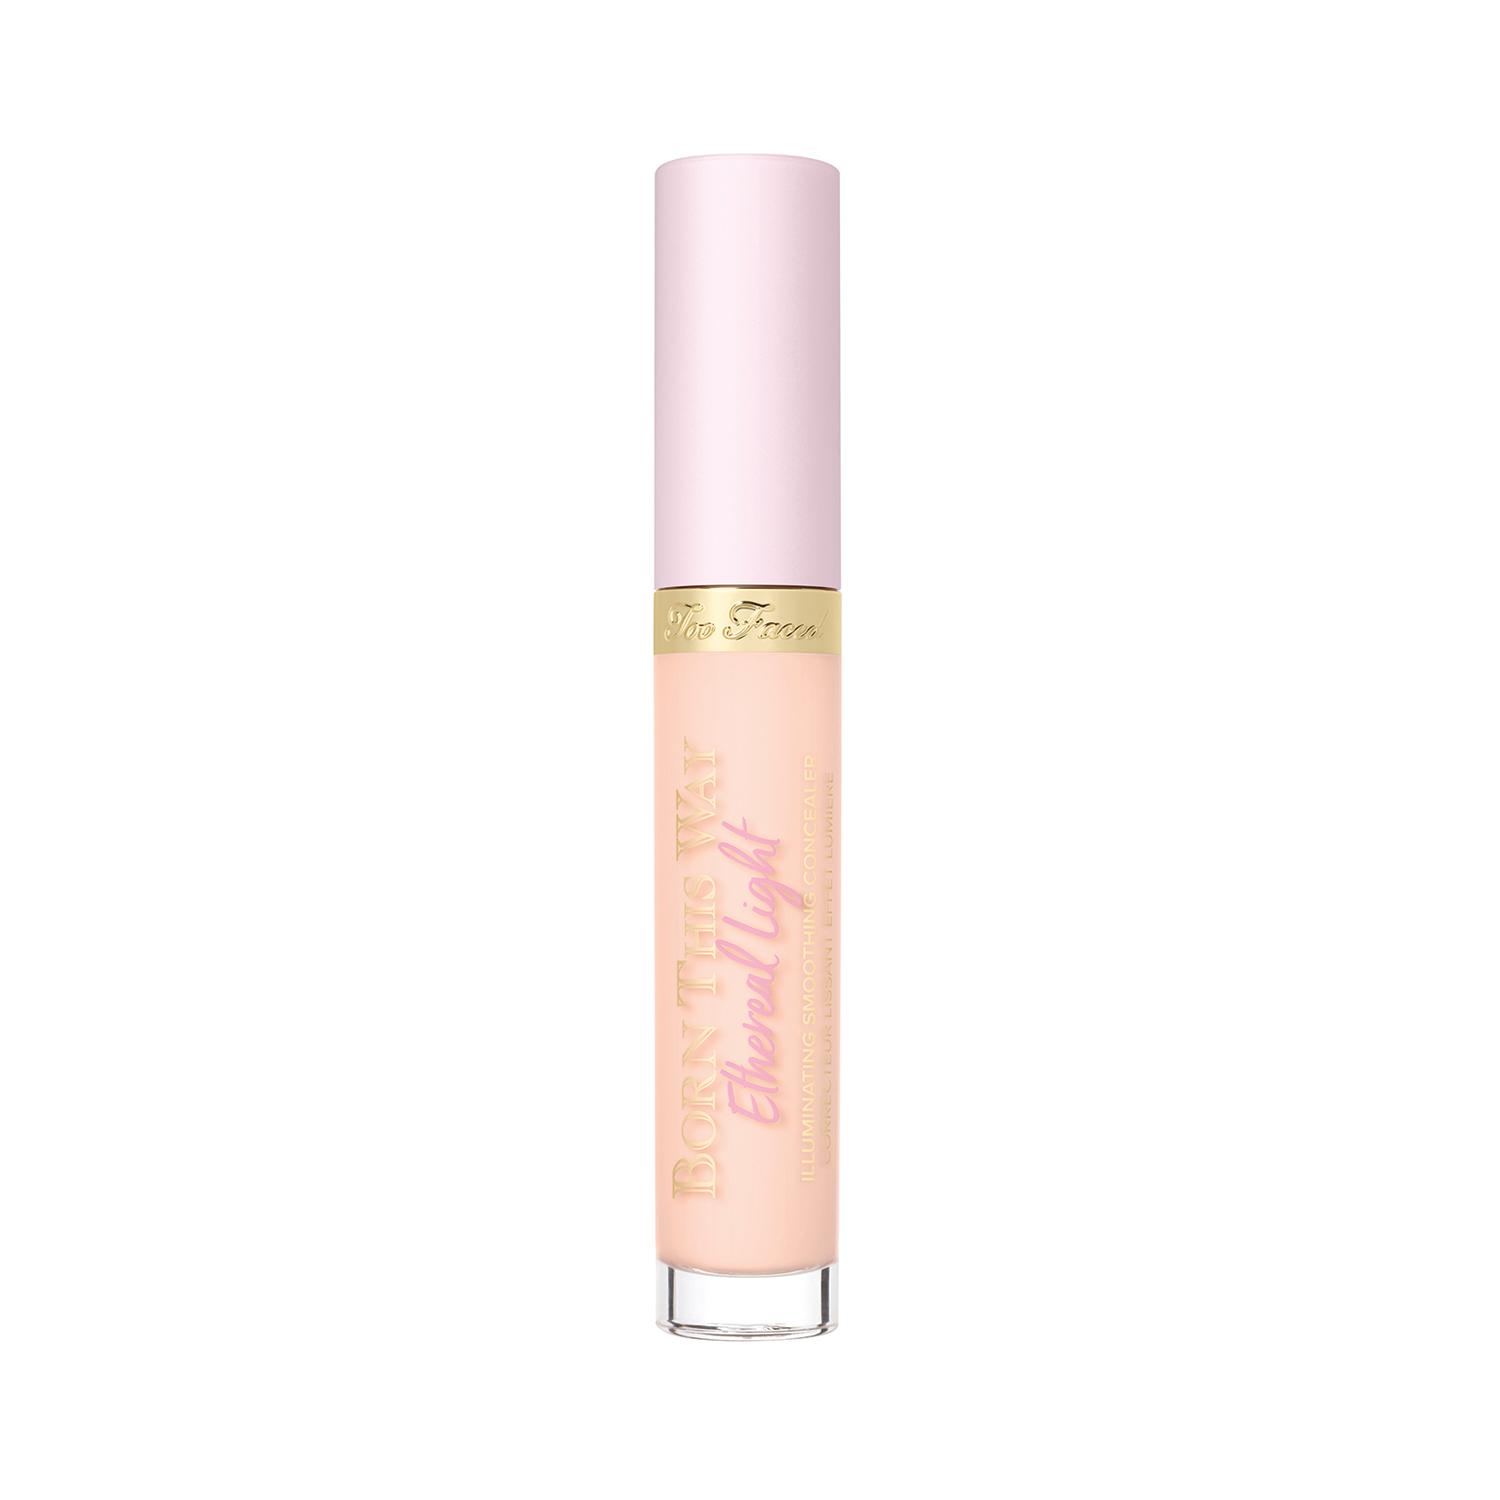 Too Faced | Too Faced Born This Way Illuminating Concealer - Oatmeal (5ml)